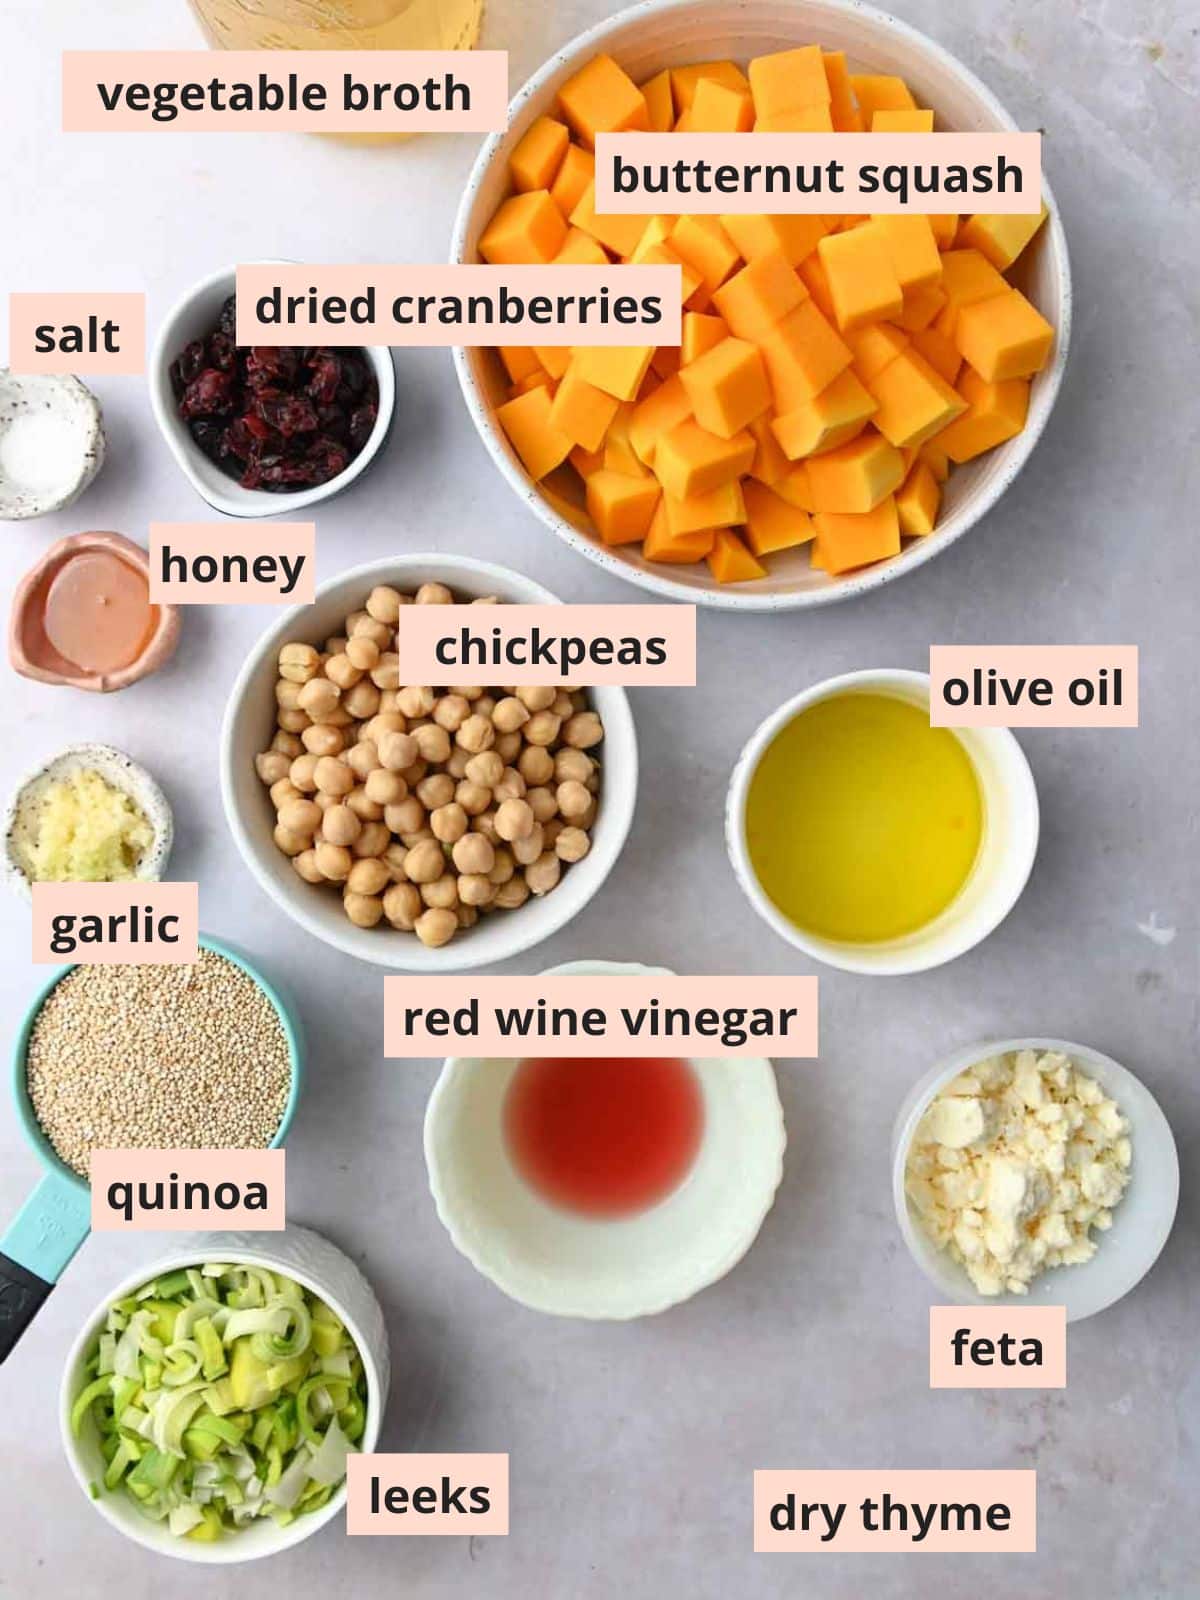 Labeled ingredients used to make butternut squash salad.